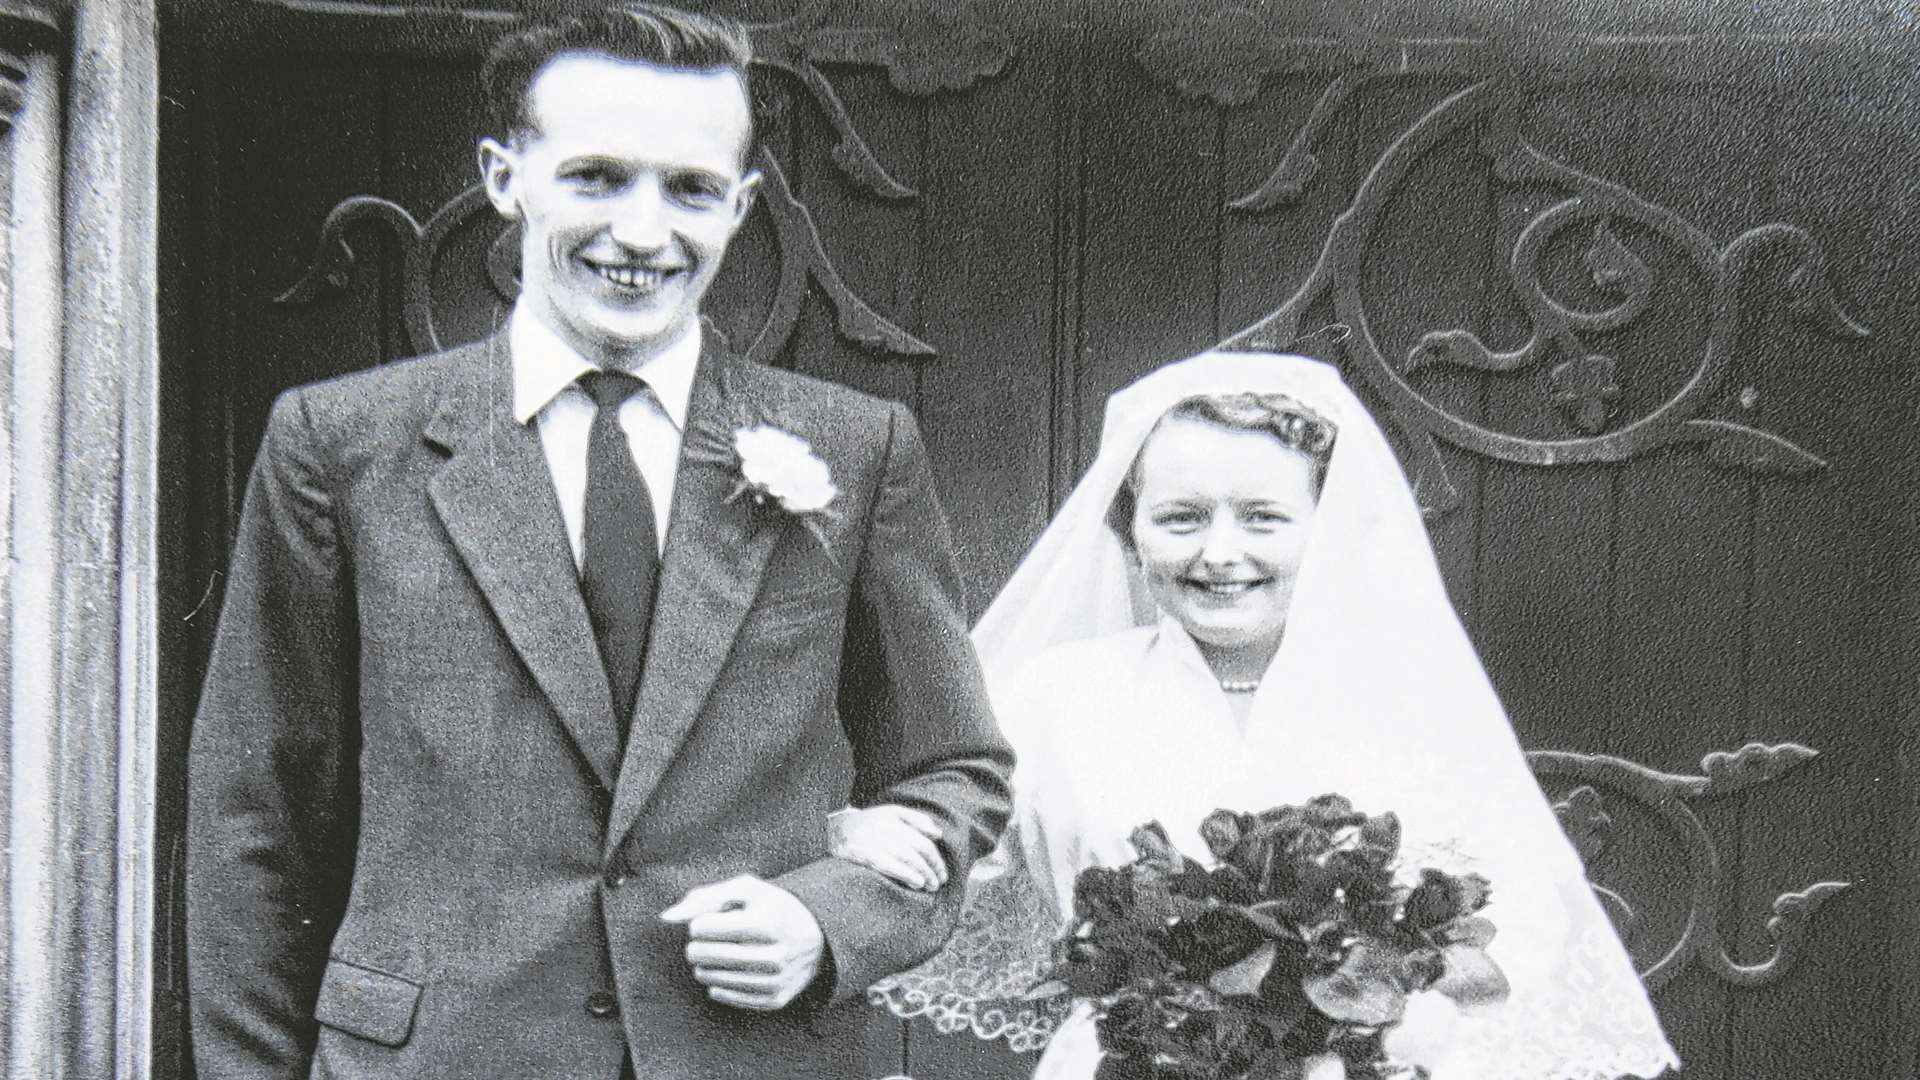 Don and Glora on their wedding day